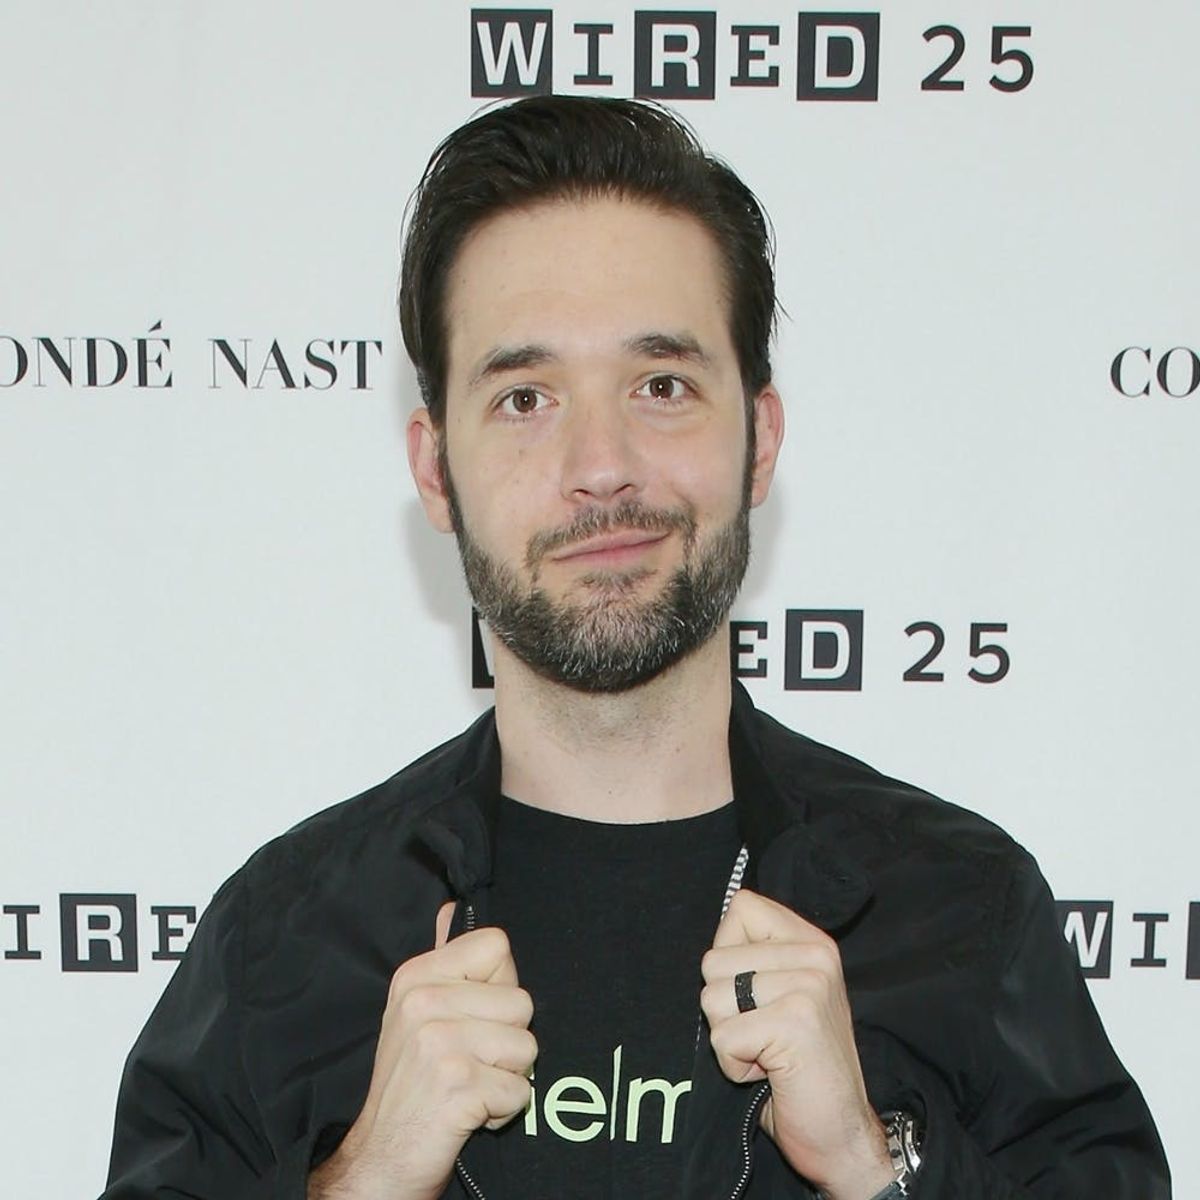 It’s Great That Alexis Ohanian Calls Out Sexism, But His Website Is Part of the Problem